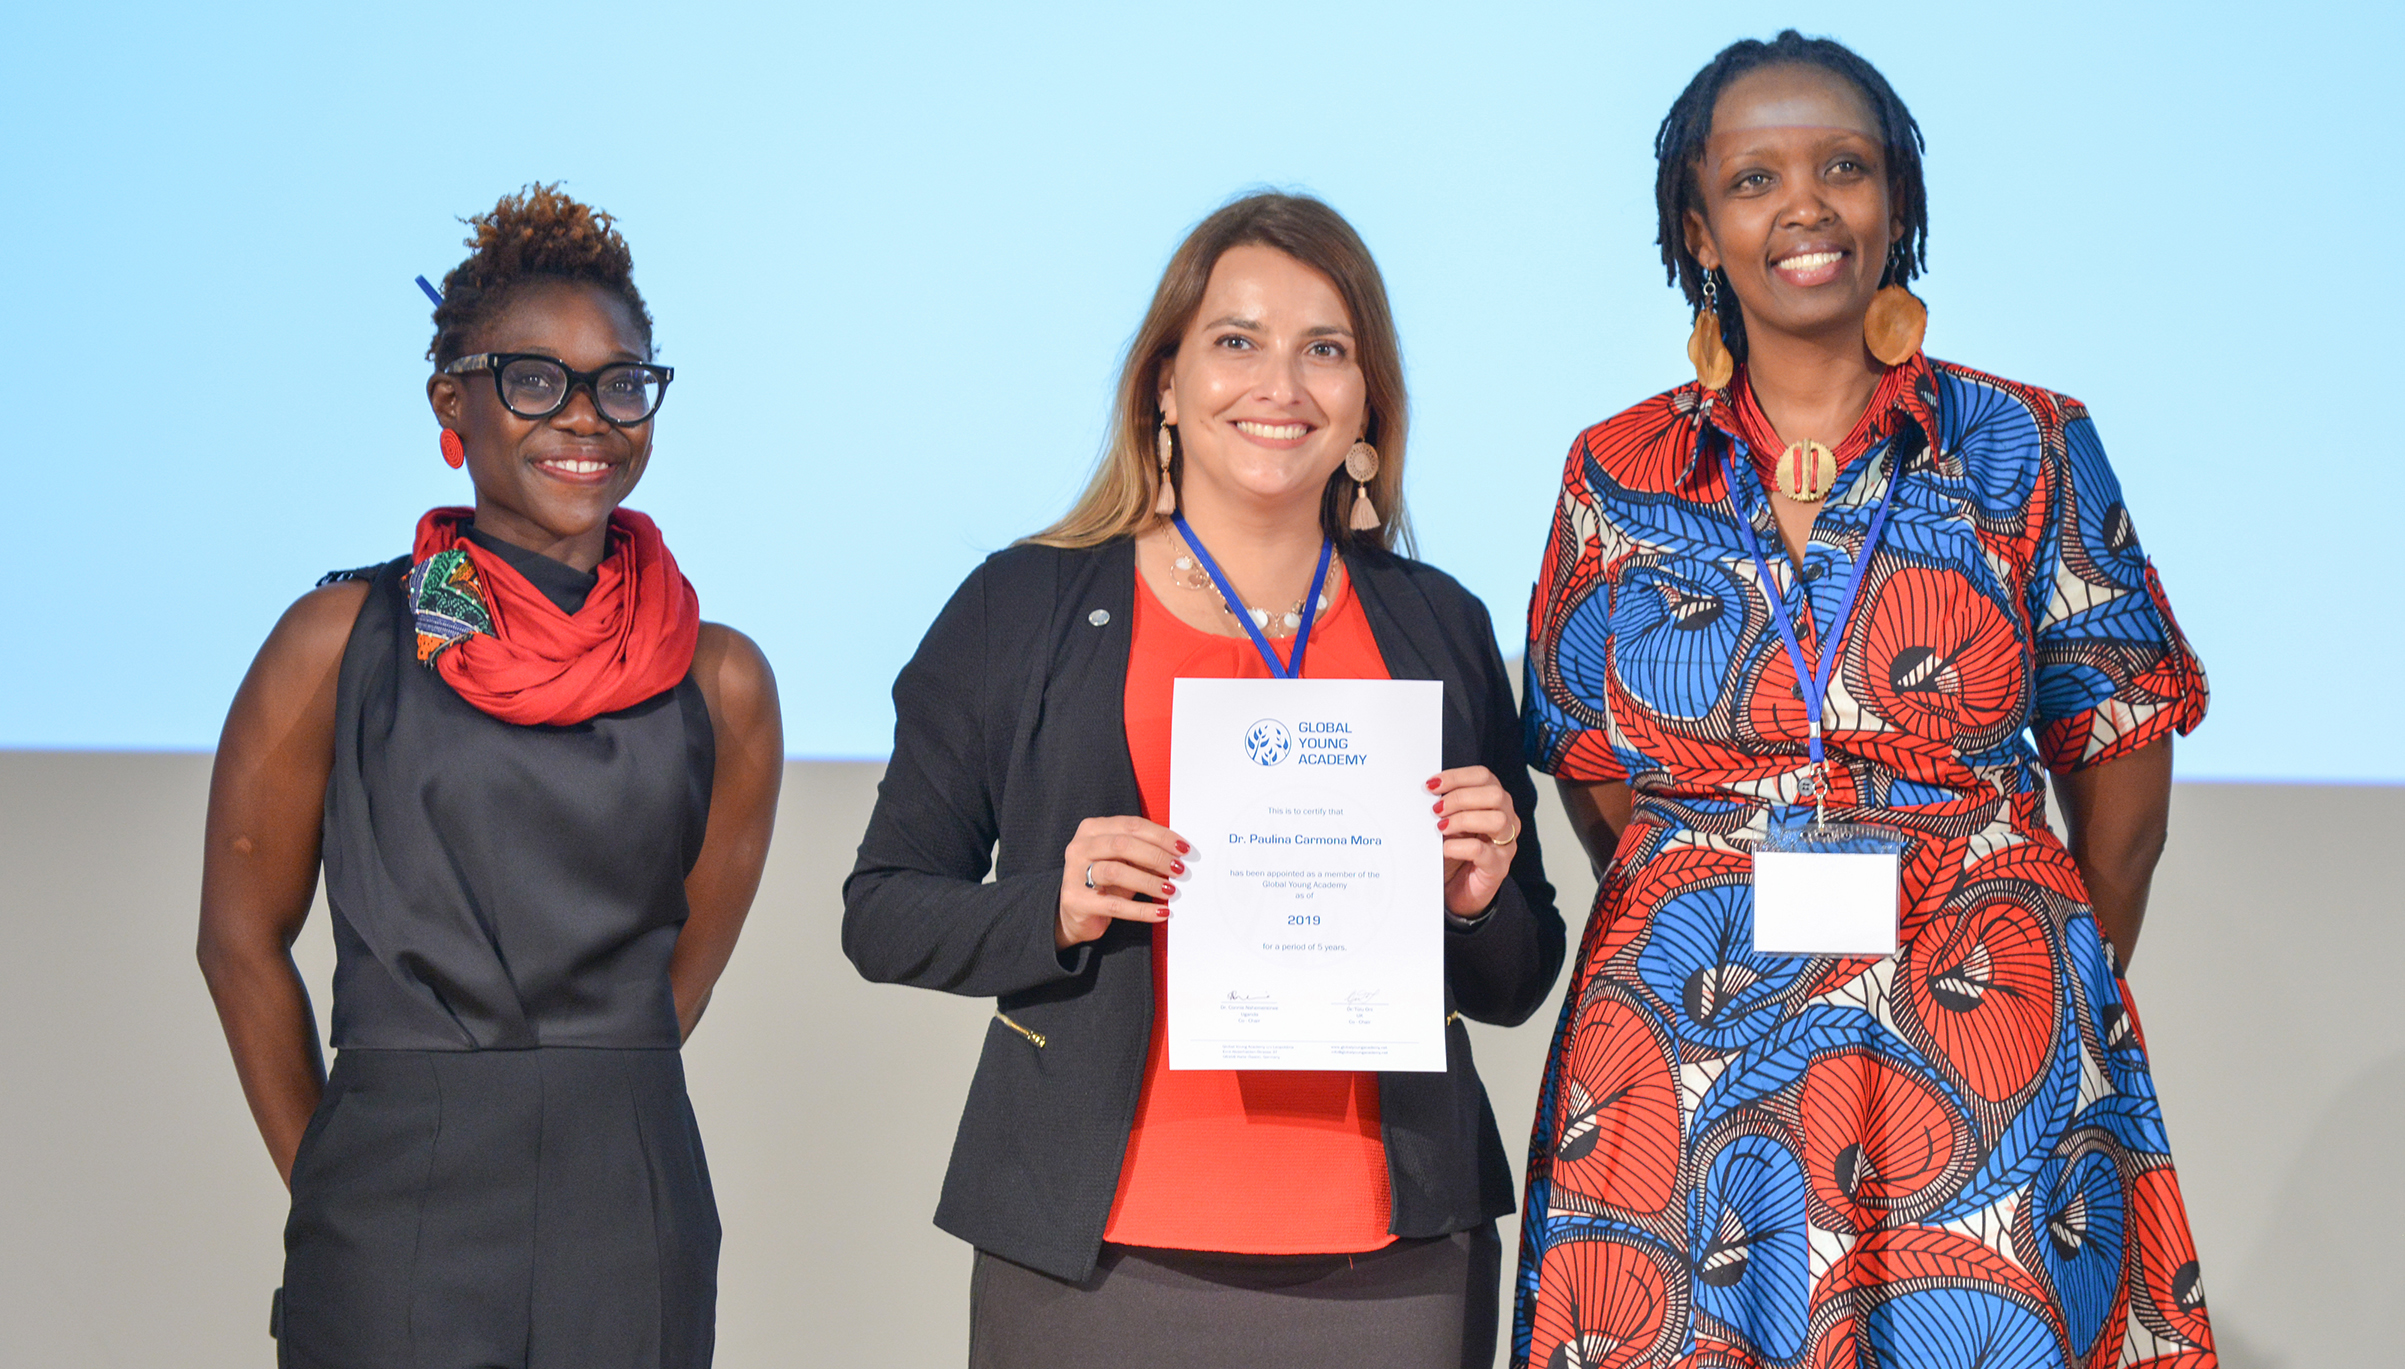 Carmona-Mora with Global Young Academy co-chairs, Tolu Oni and Connie Nshemereirwe, at New Global Young Academy member induction ceremony in Halle, Germany in May 2019.